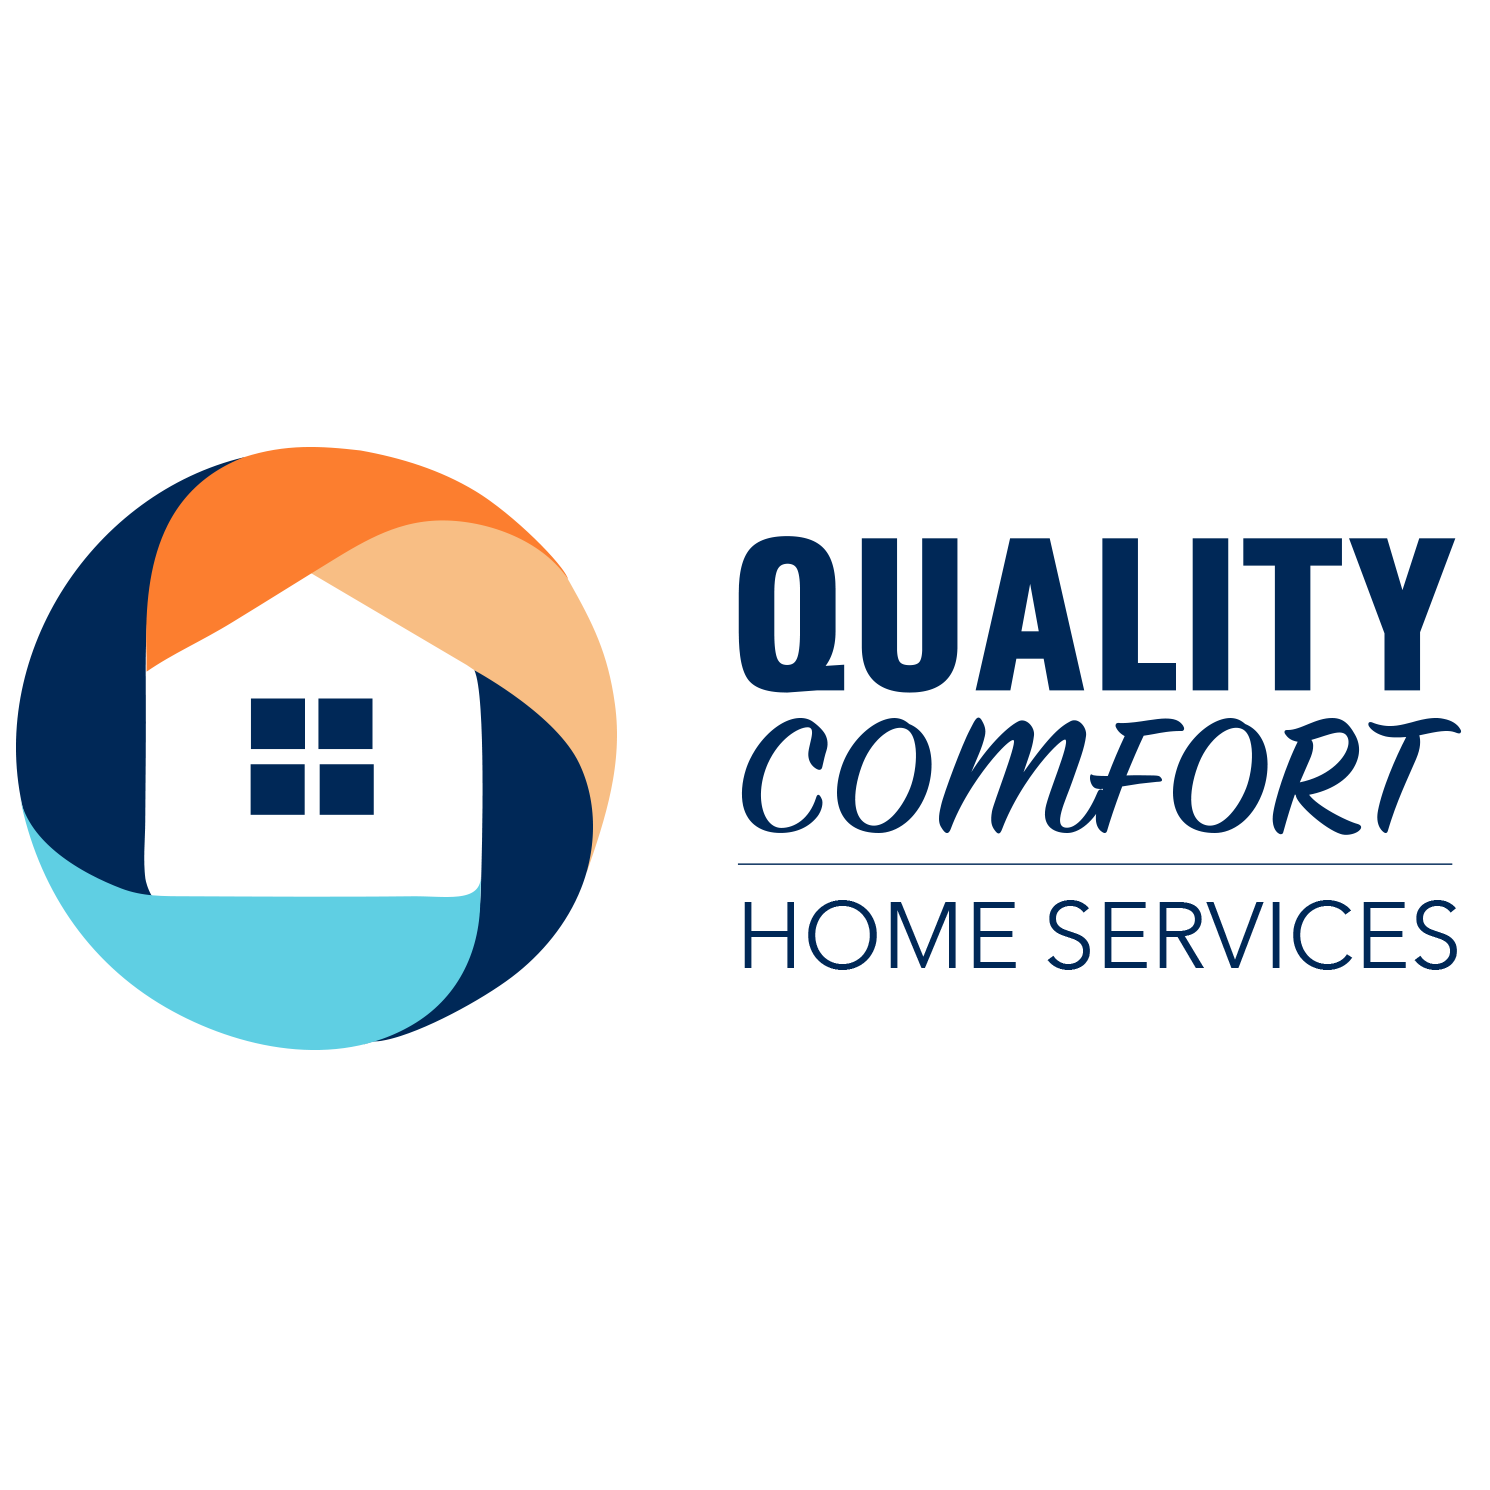 Quality Comfort Home Services HVAC, Plumbing, Duct Cleaning - Cincinnati, OH 45236 - (513)620-4822 | ShowMeLocal.com